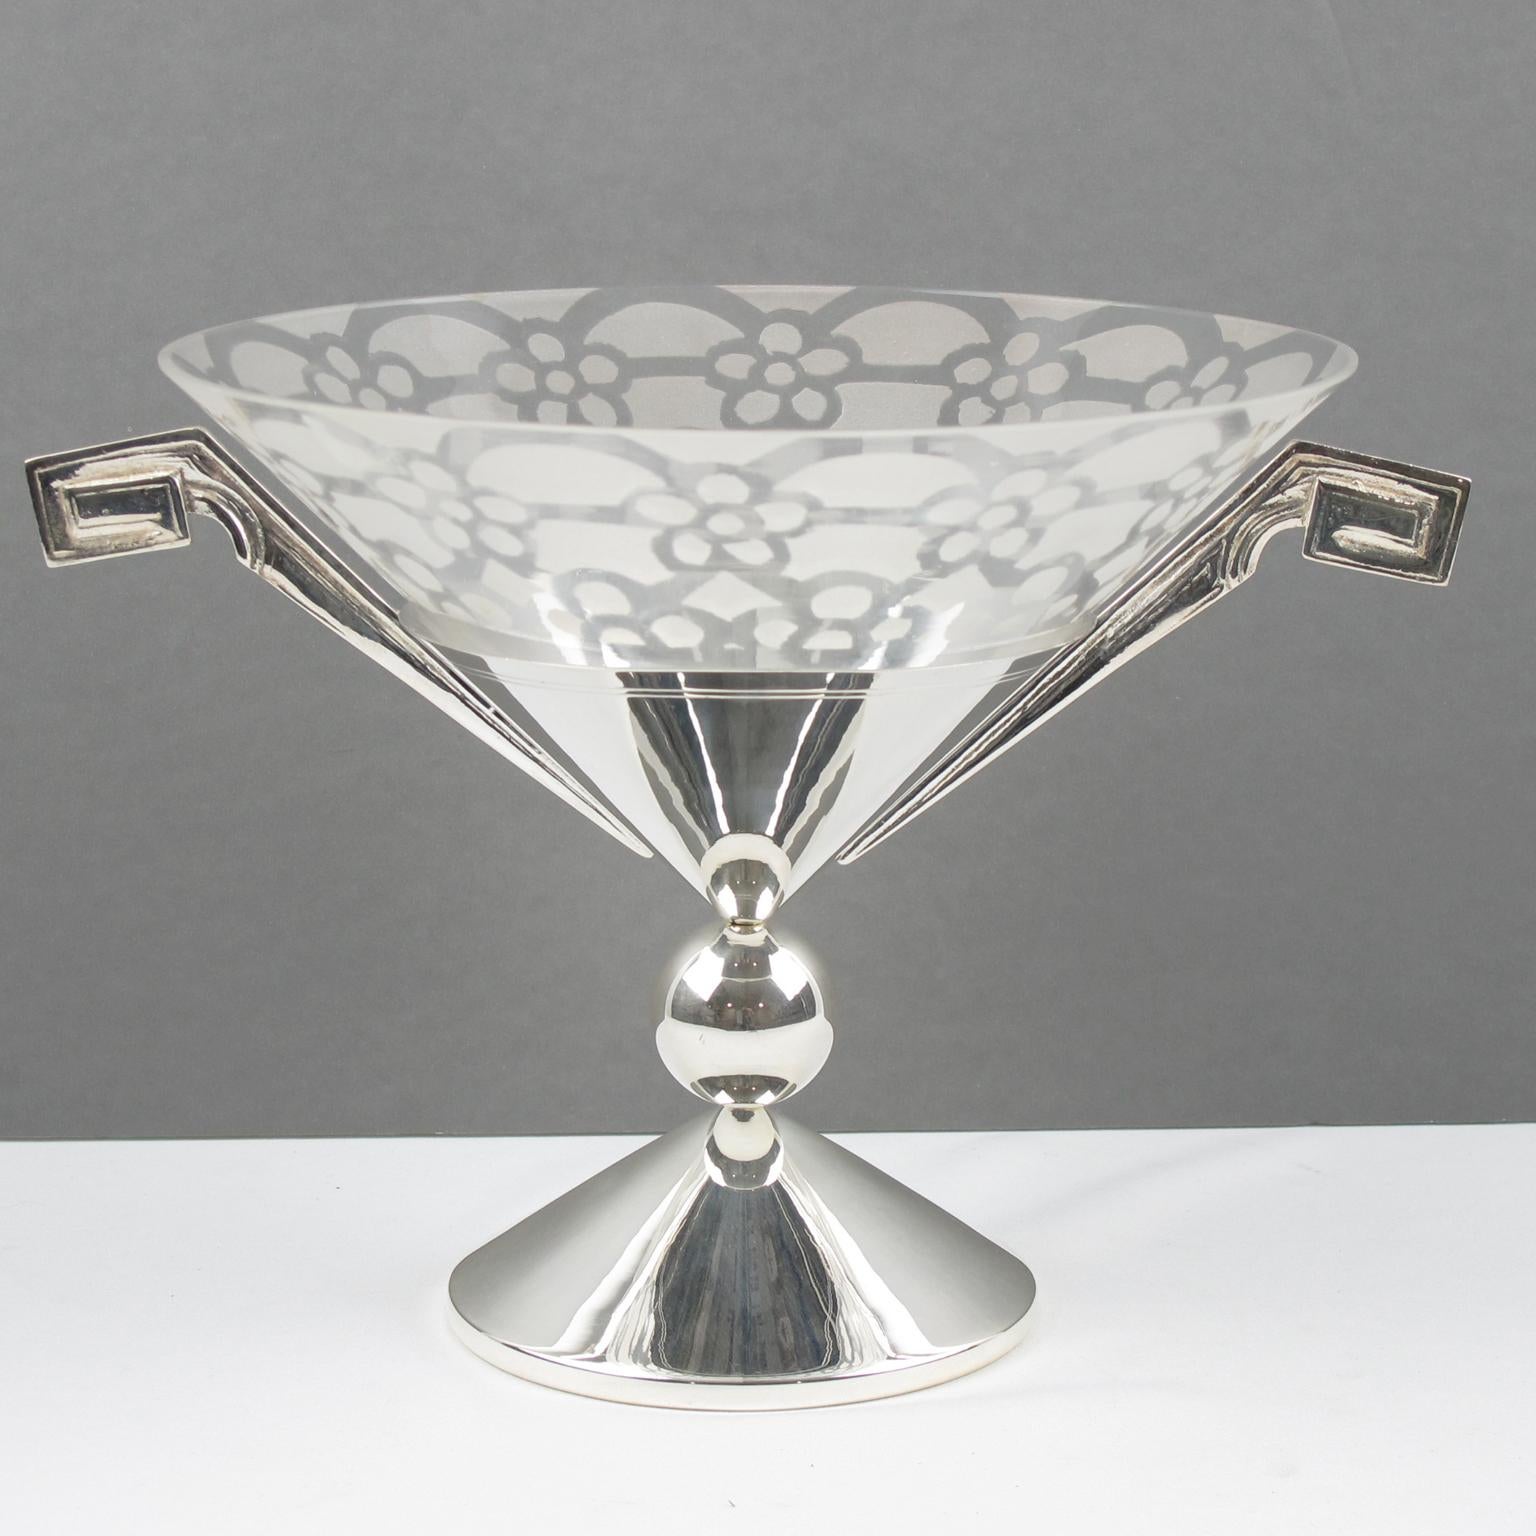 Stylish French Art Deco centerpiece or decorative bowl. Tall pedestal shape in silver-plated metal with engraving and large geometric handles. Insert bowl is in clear blown glass with Art Deco geometric frosted etching all around. No visible maker's